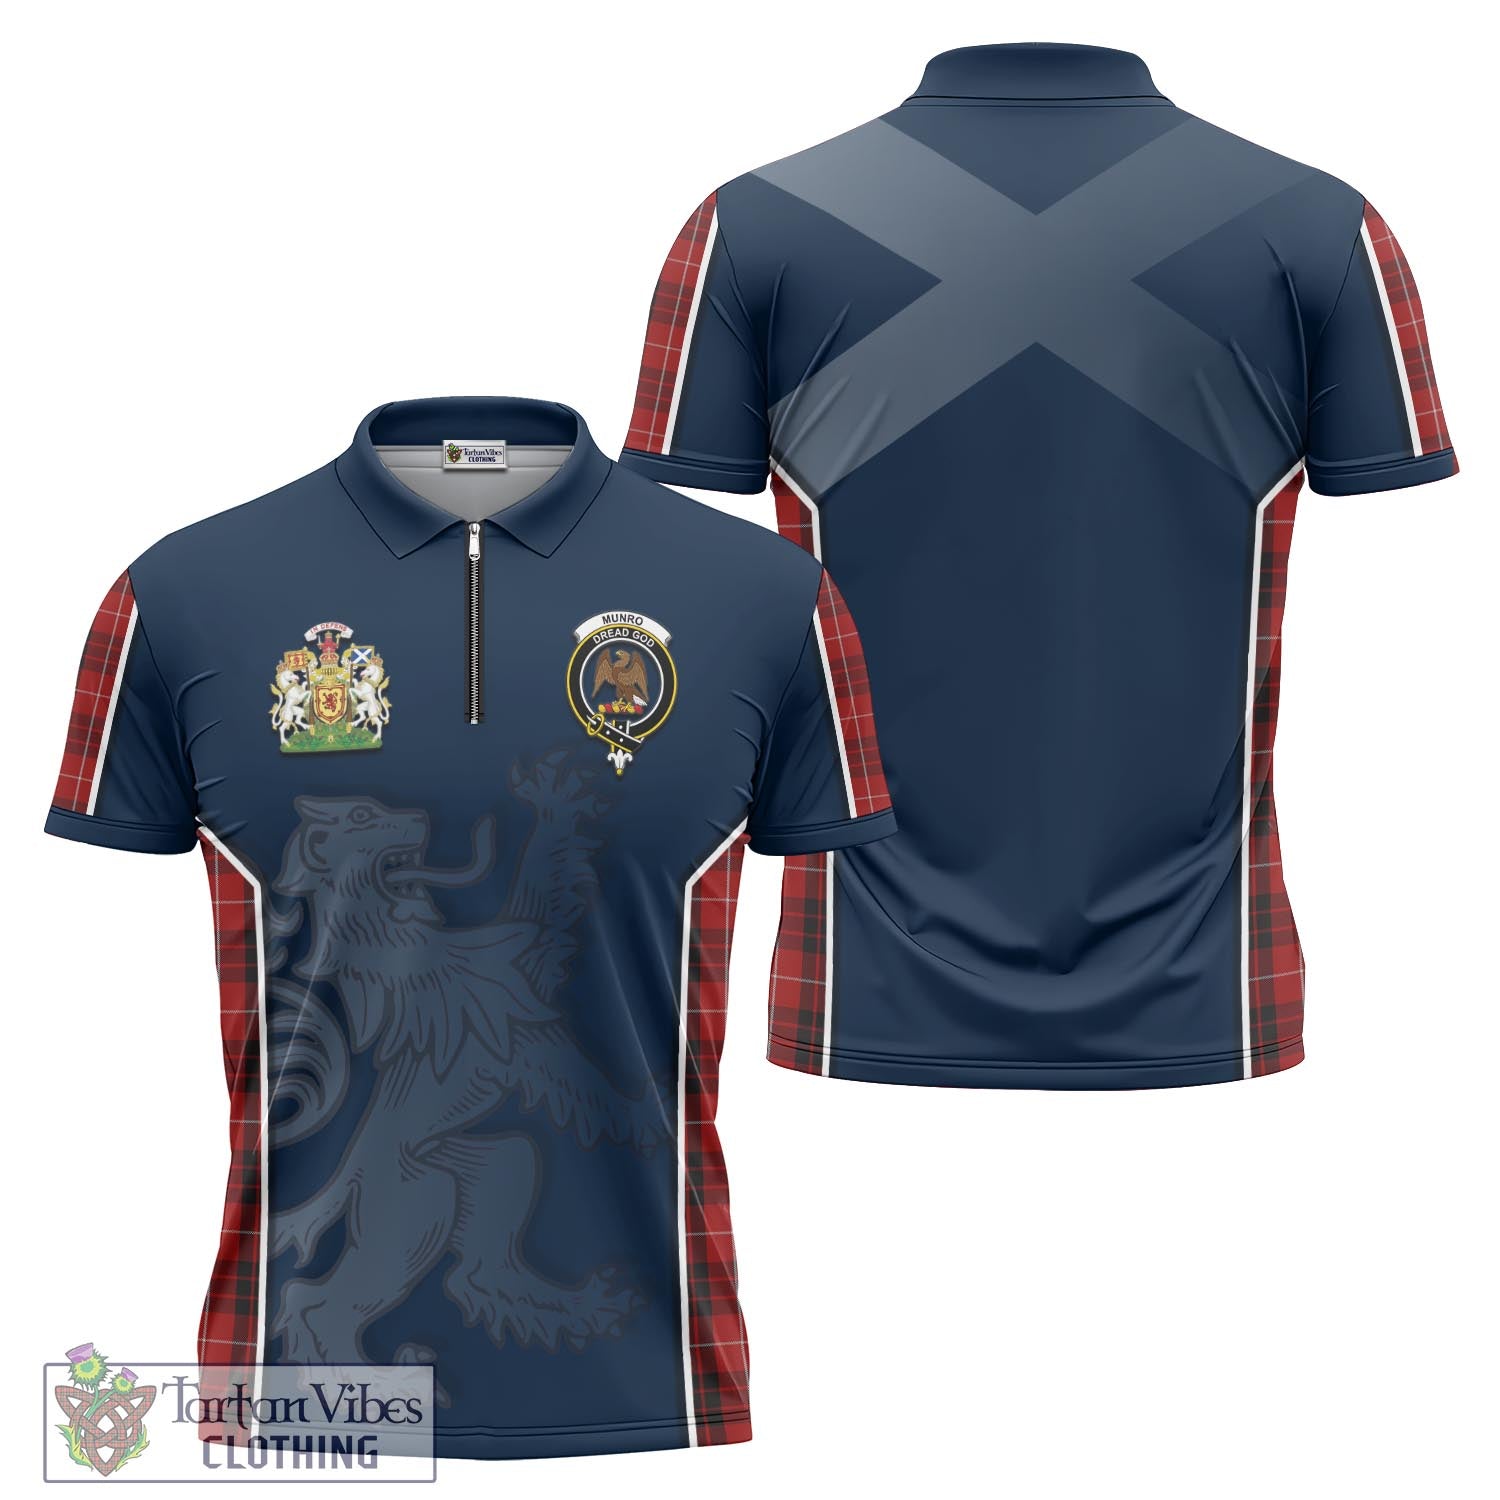 Tartan Vibes Clothing Munro Black and Red Tartan Zipper Polo Shirt with Family Crest and Lion Rampant Vibes Sport Style